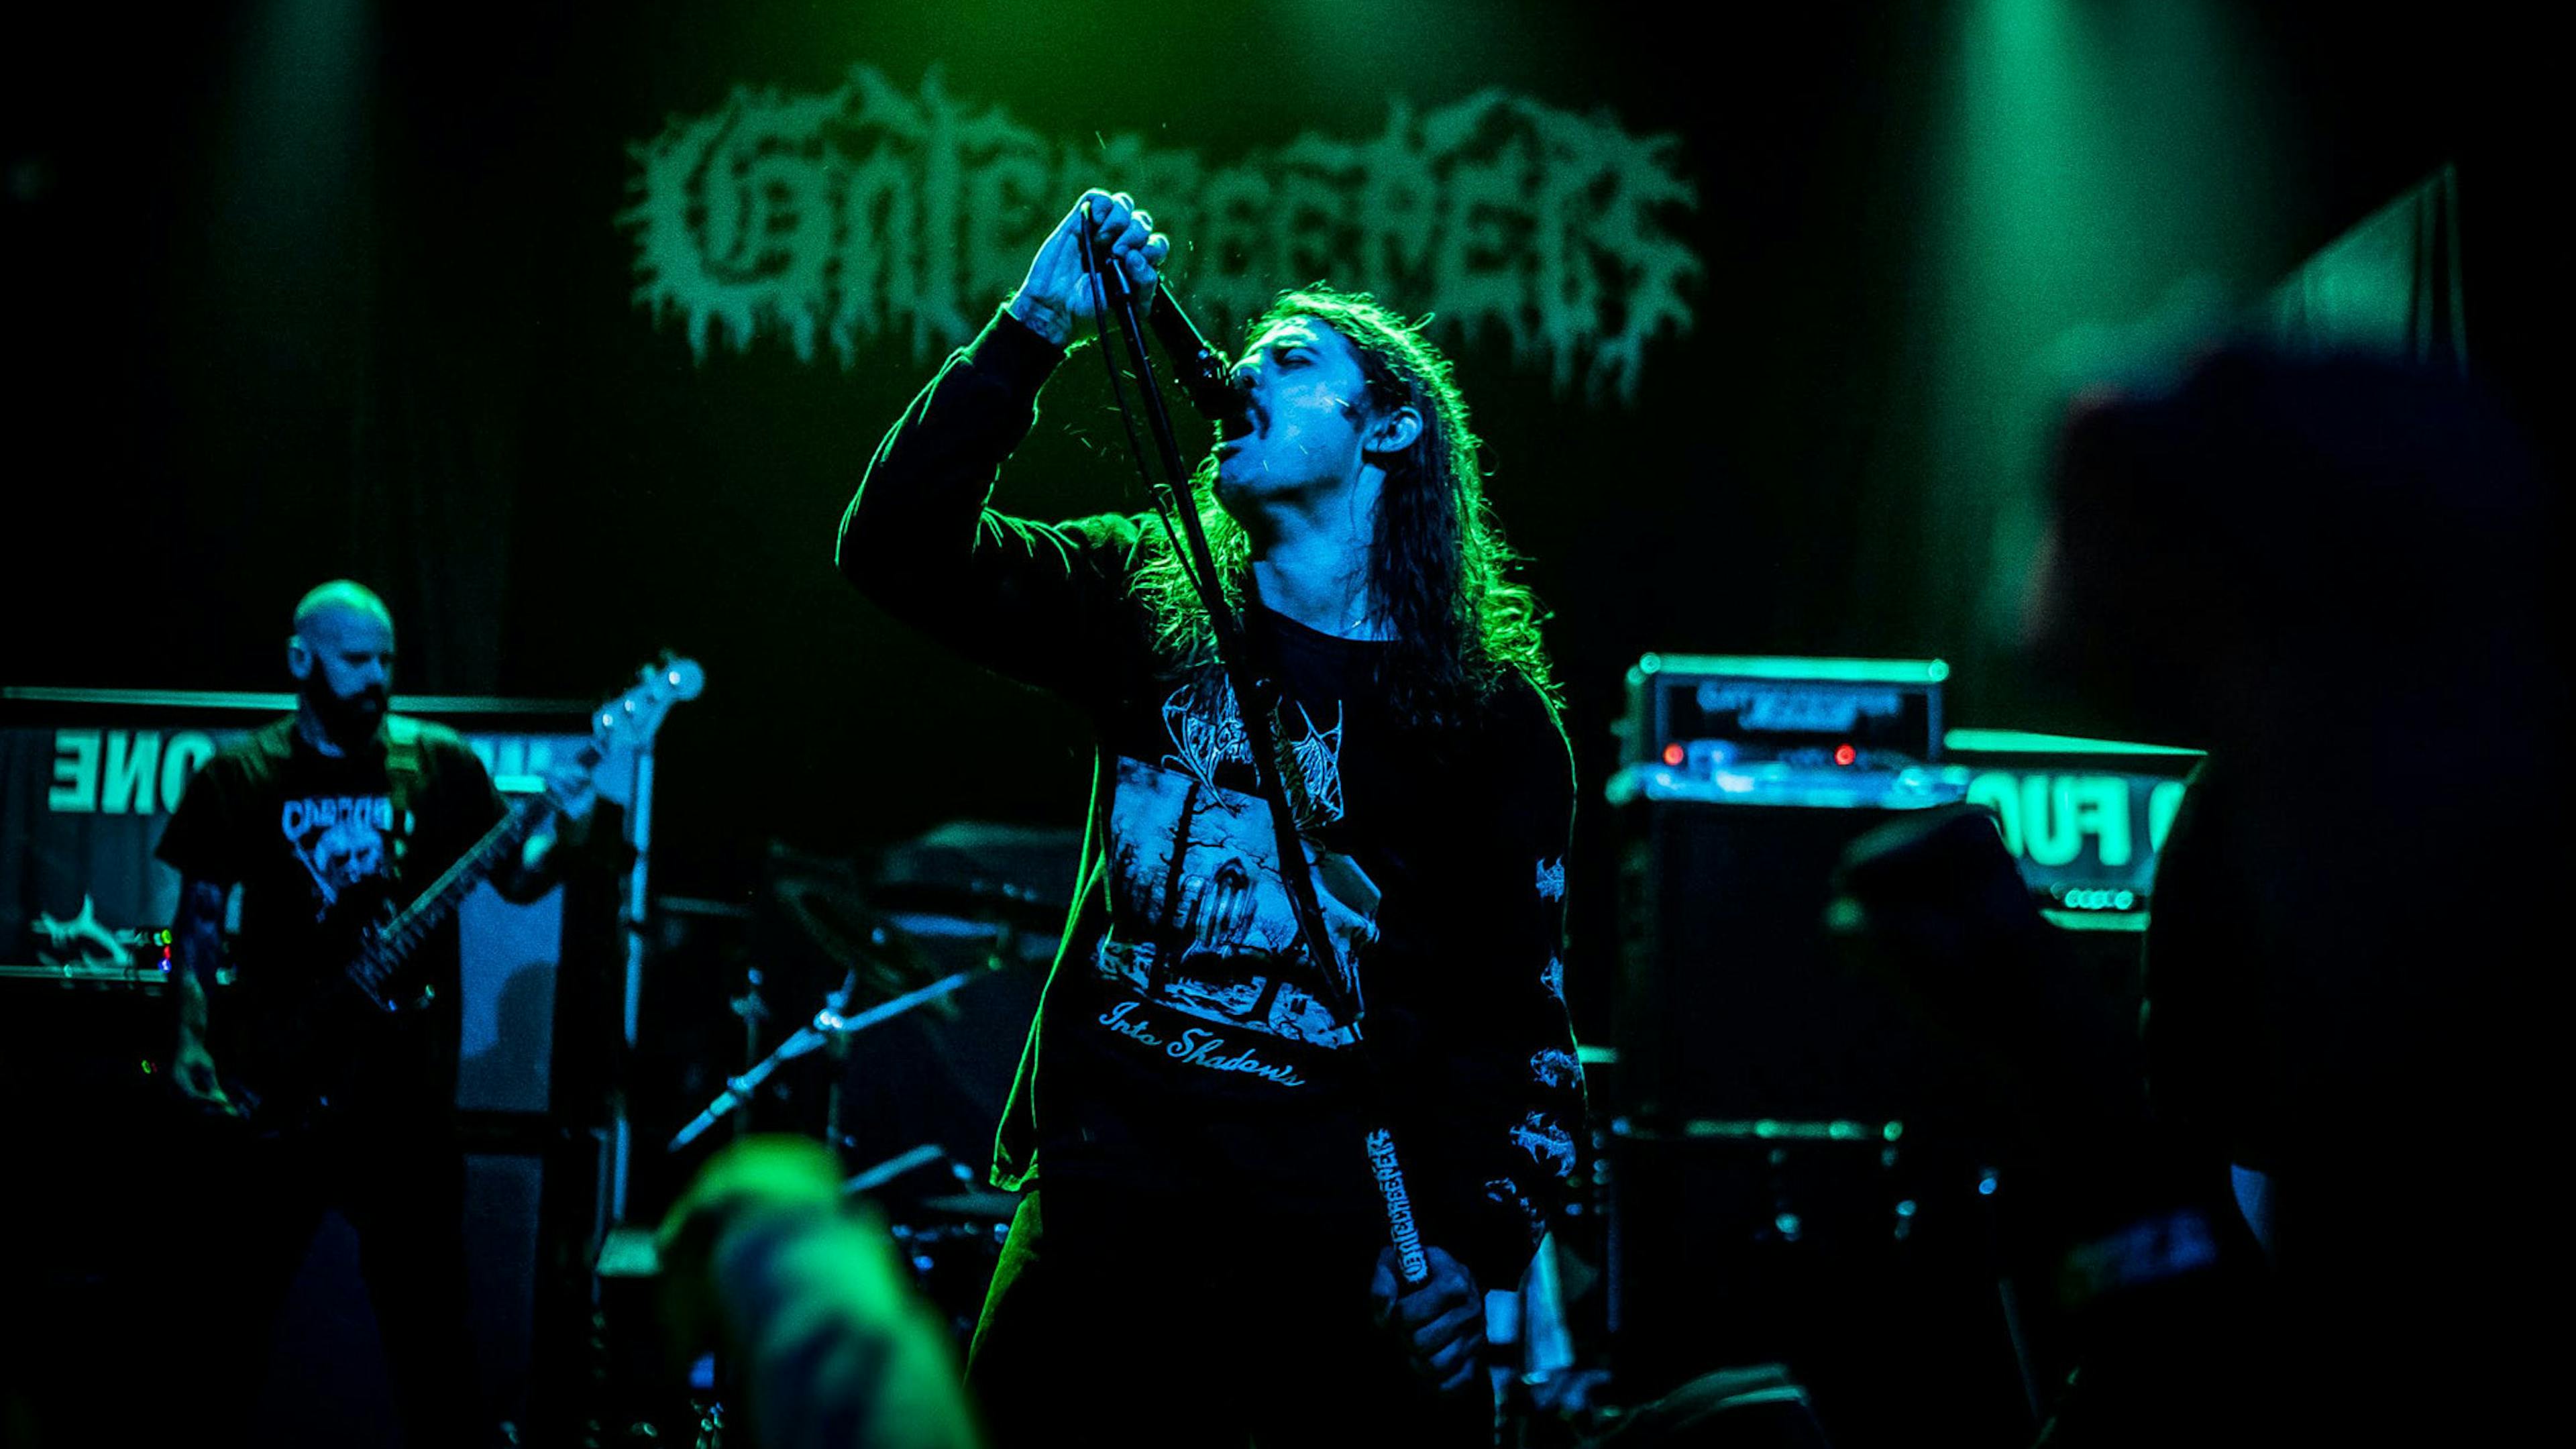 Gatecreeper announce upcoming livestream – their first gig in over a year